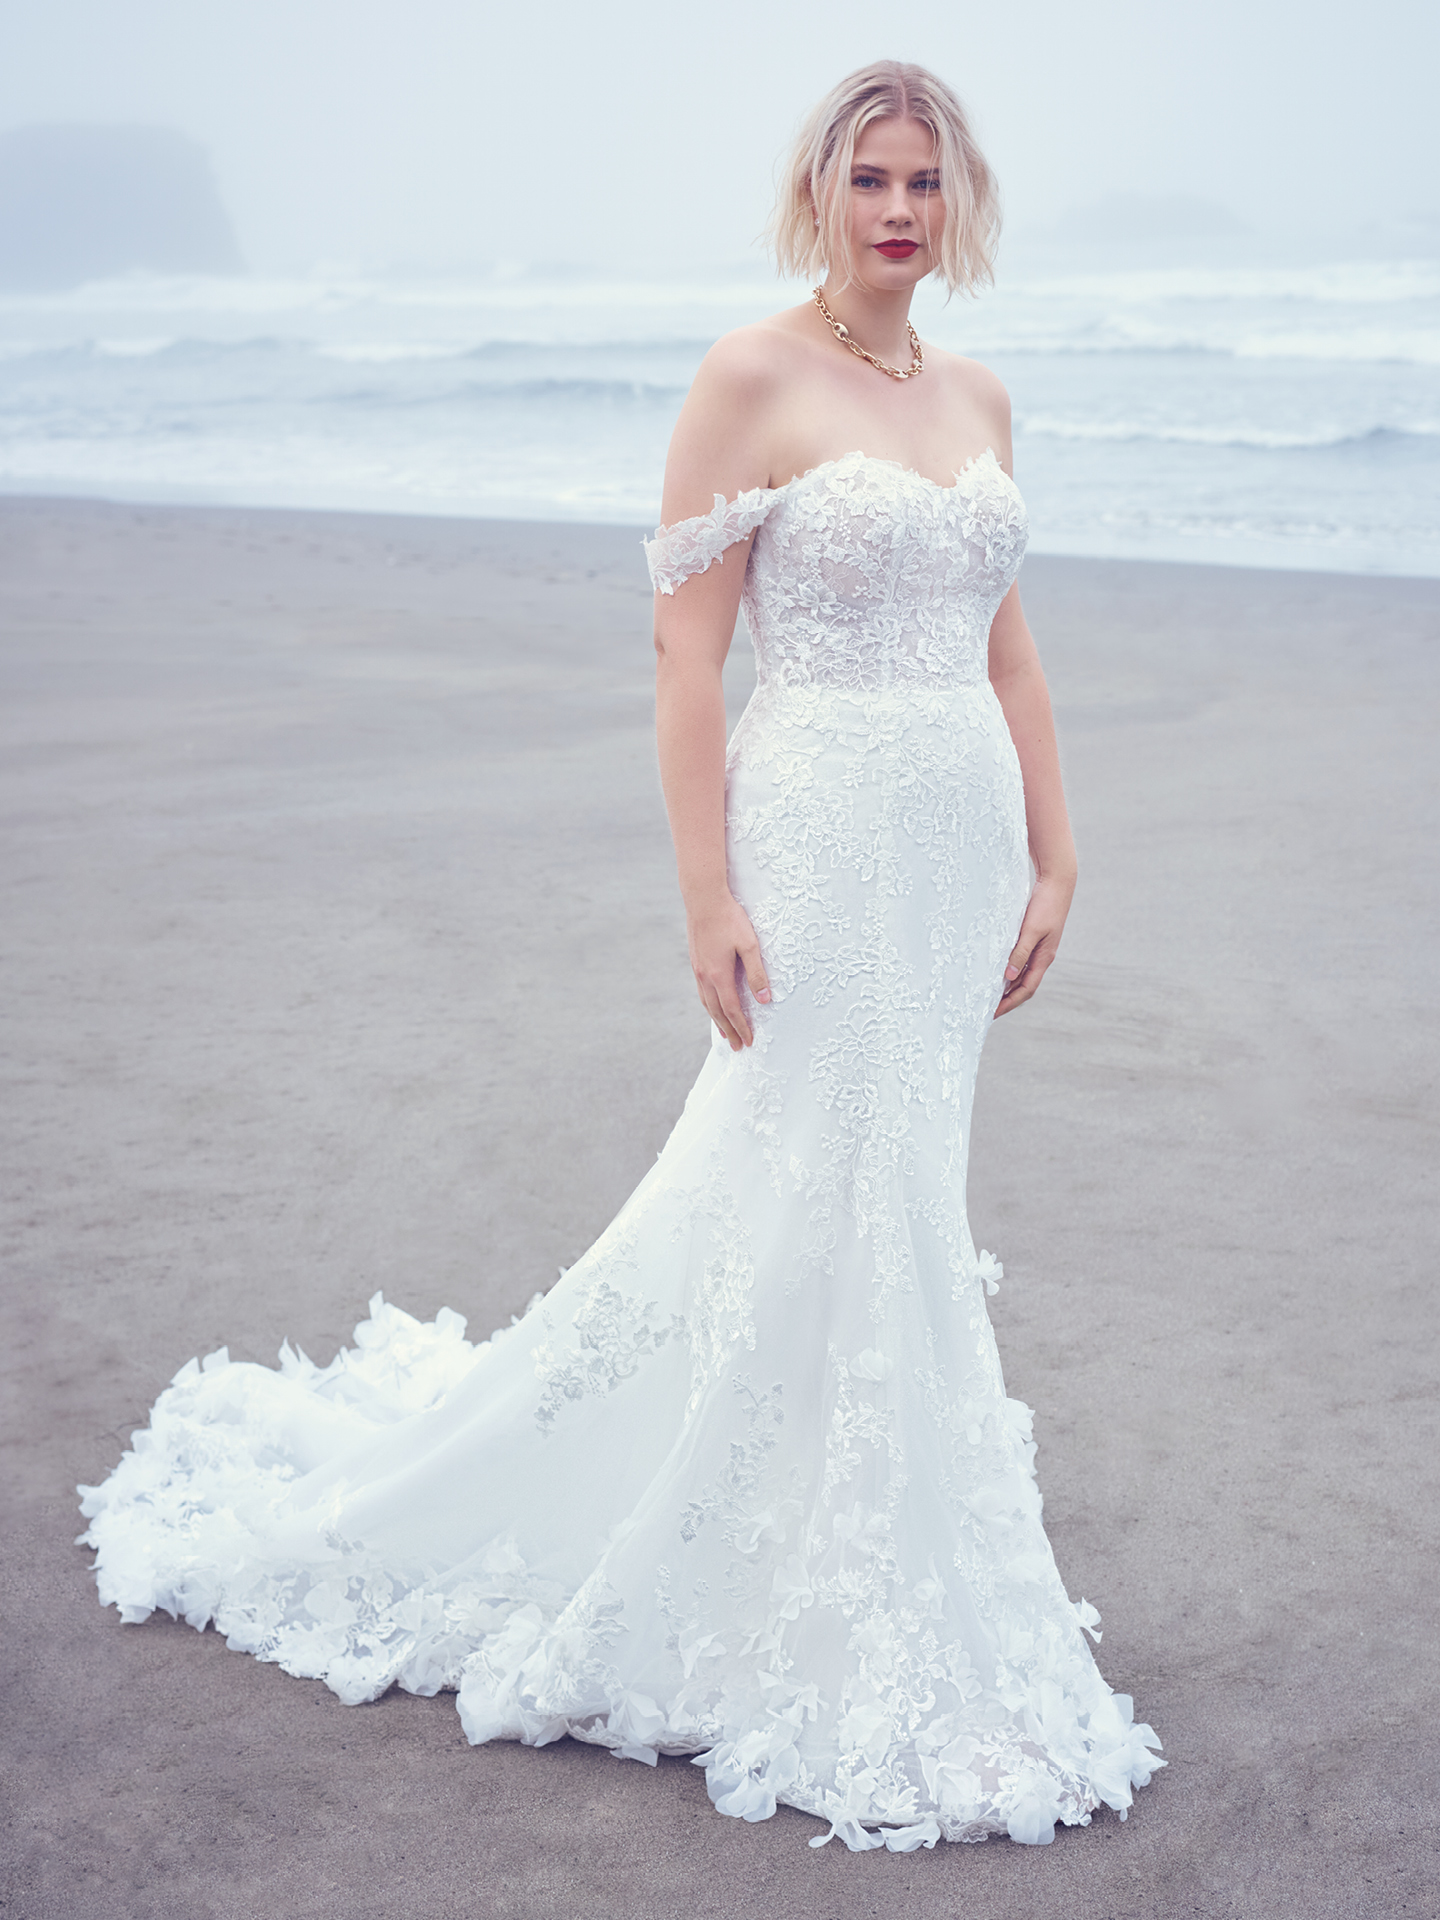 Bride In Floral Lace Wedding Dress Called Ryker By Sottero And Midgley